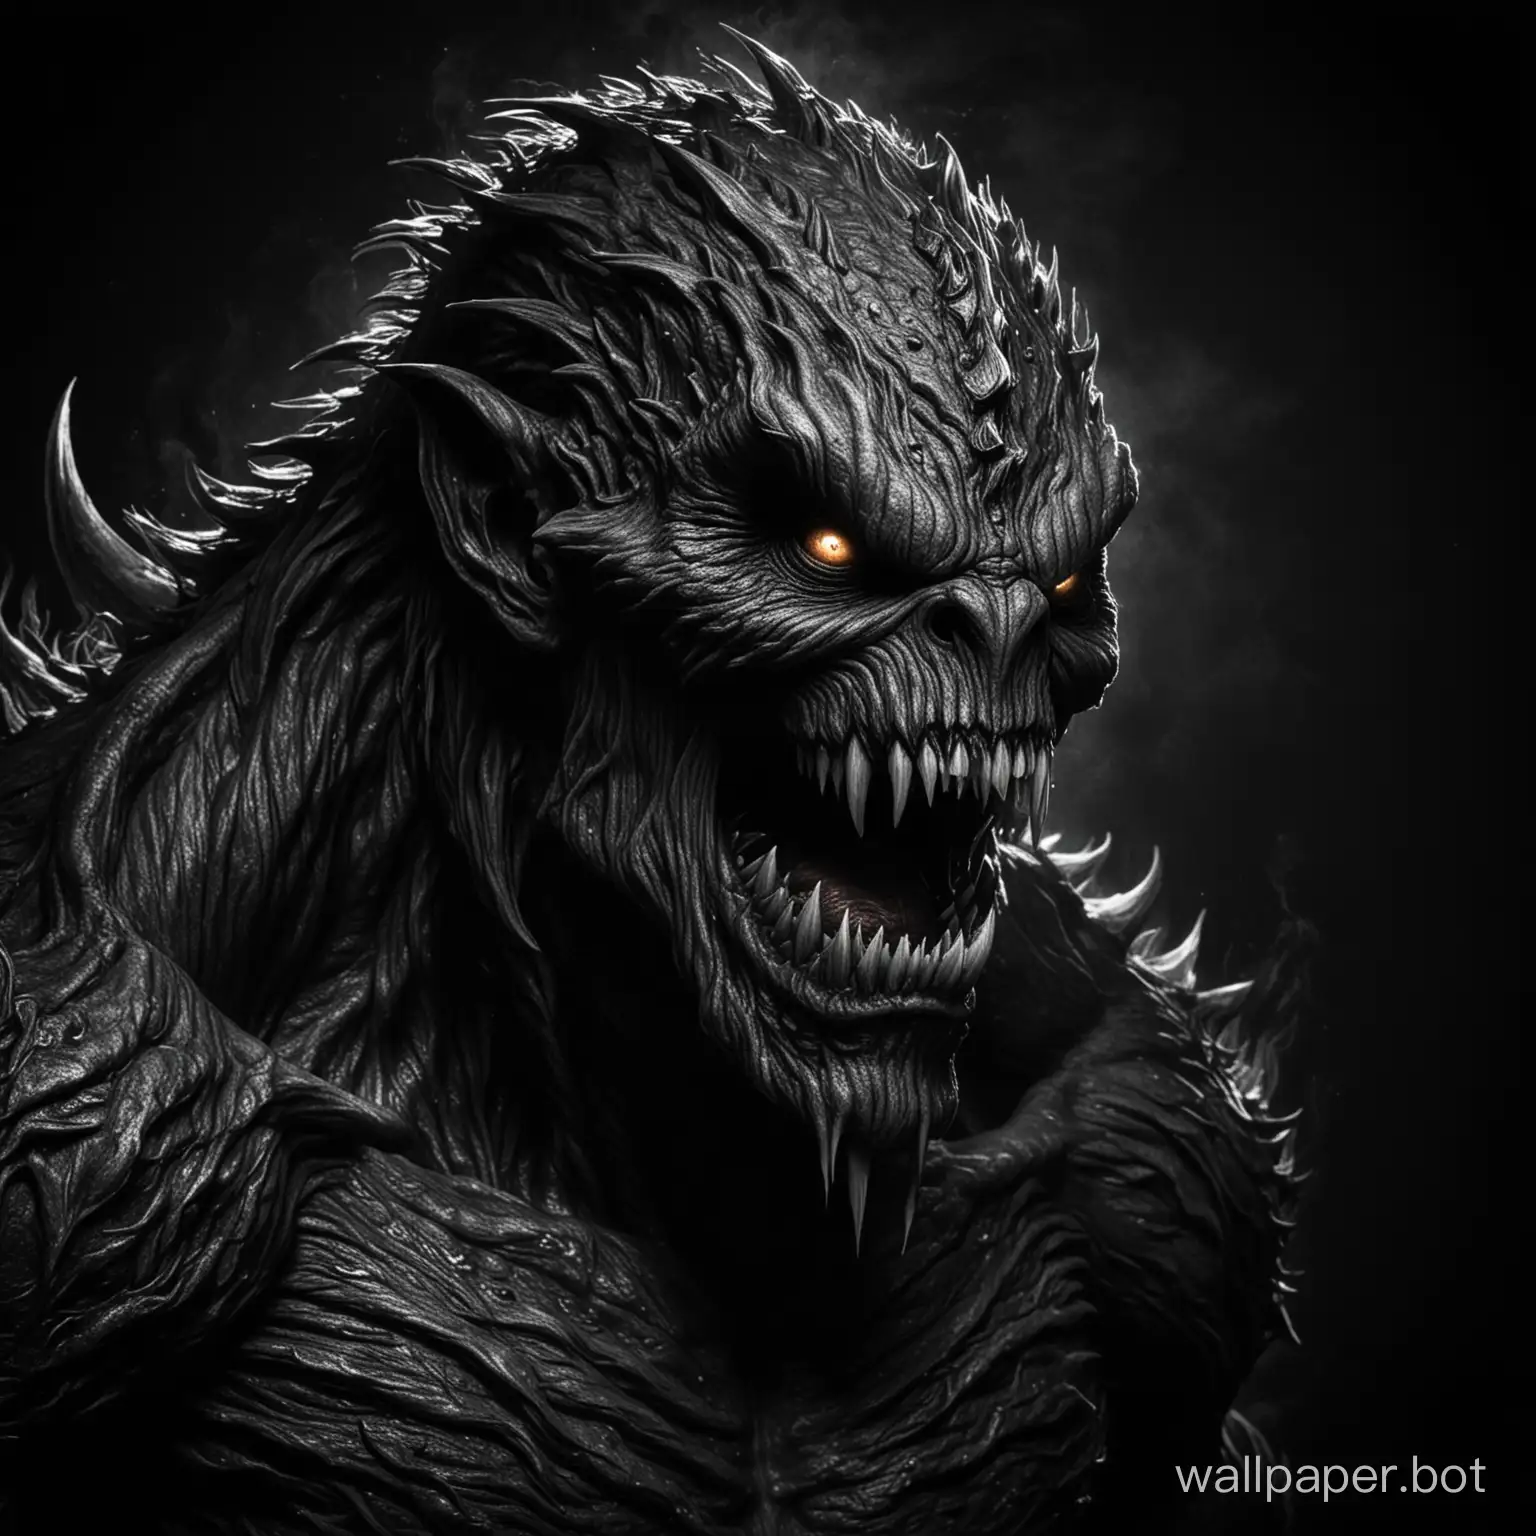 draw a fantasy horrible and scary monster on a black background